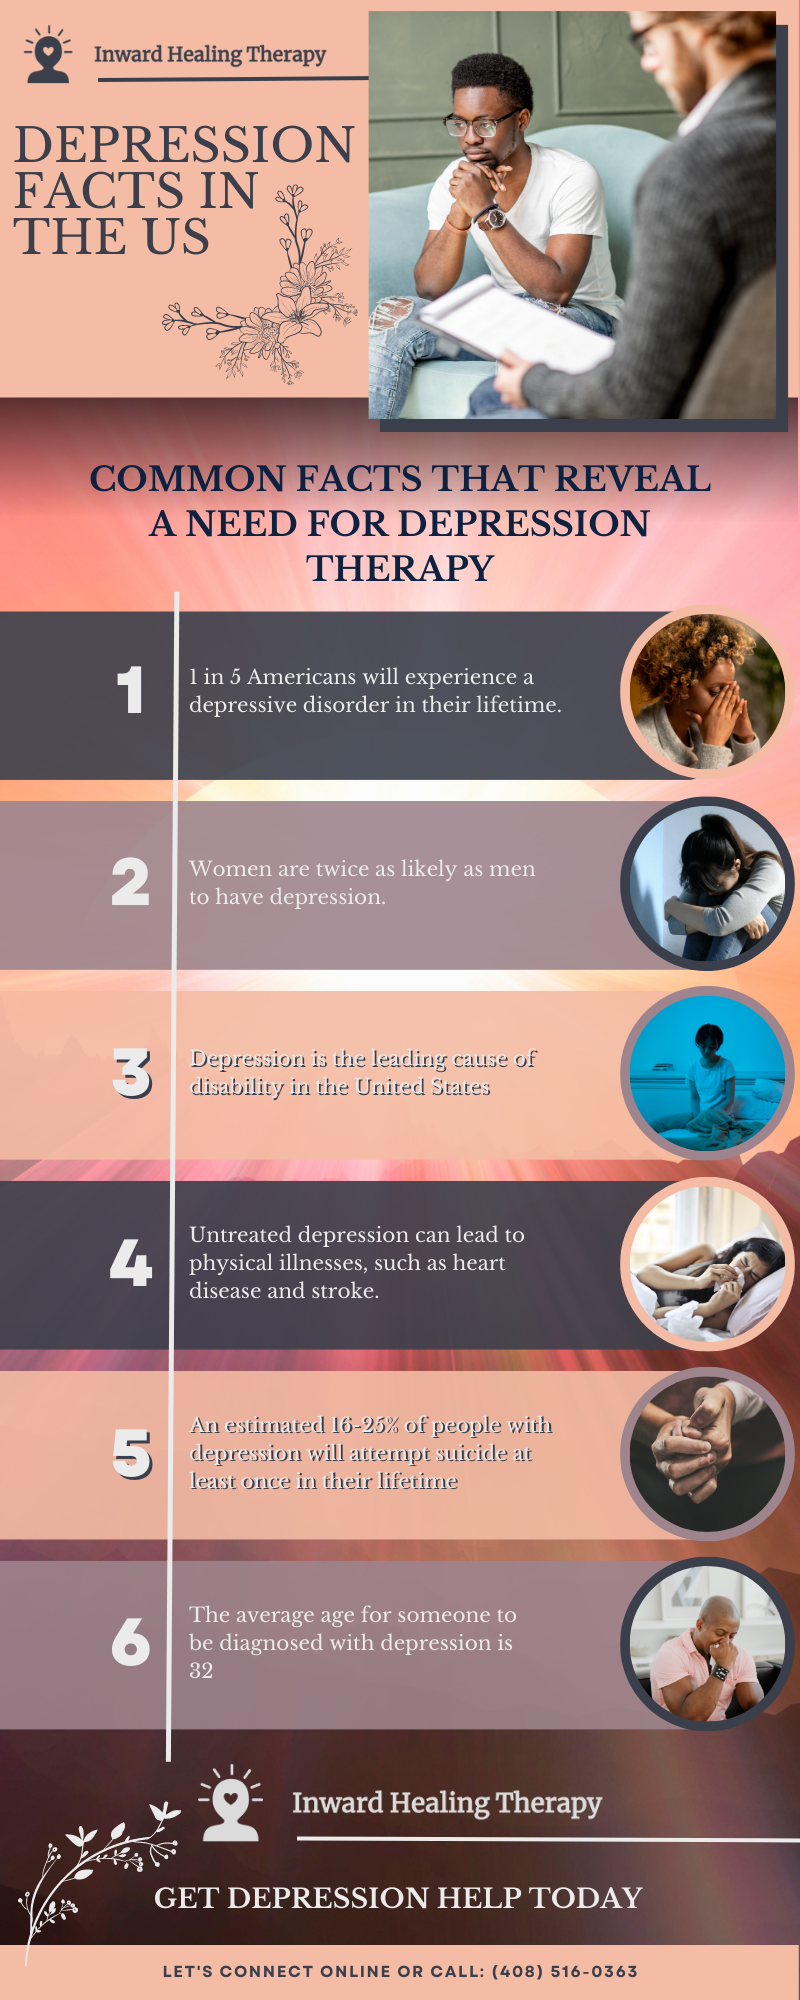 M38028 - Inward Healing Therapy - Infographic - Depression Facts in the US.png